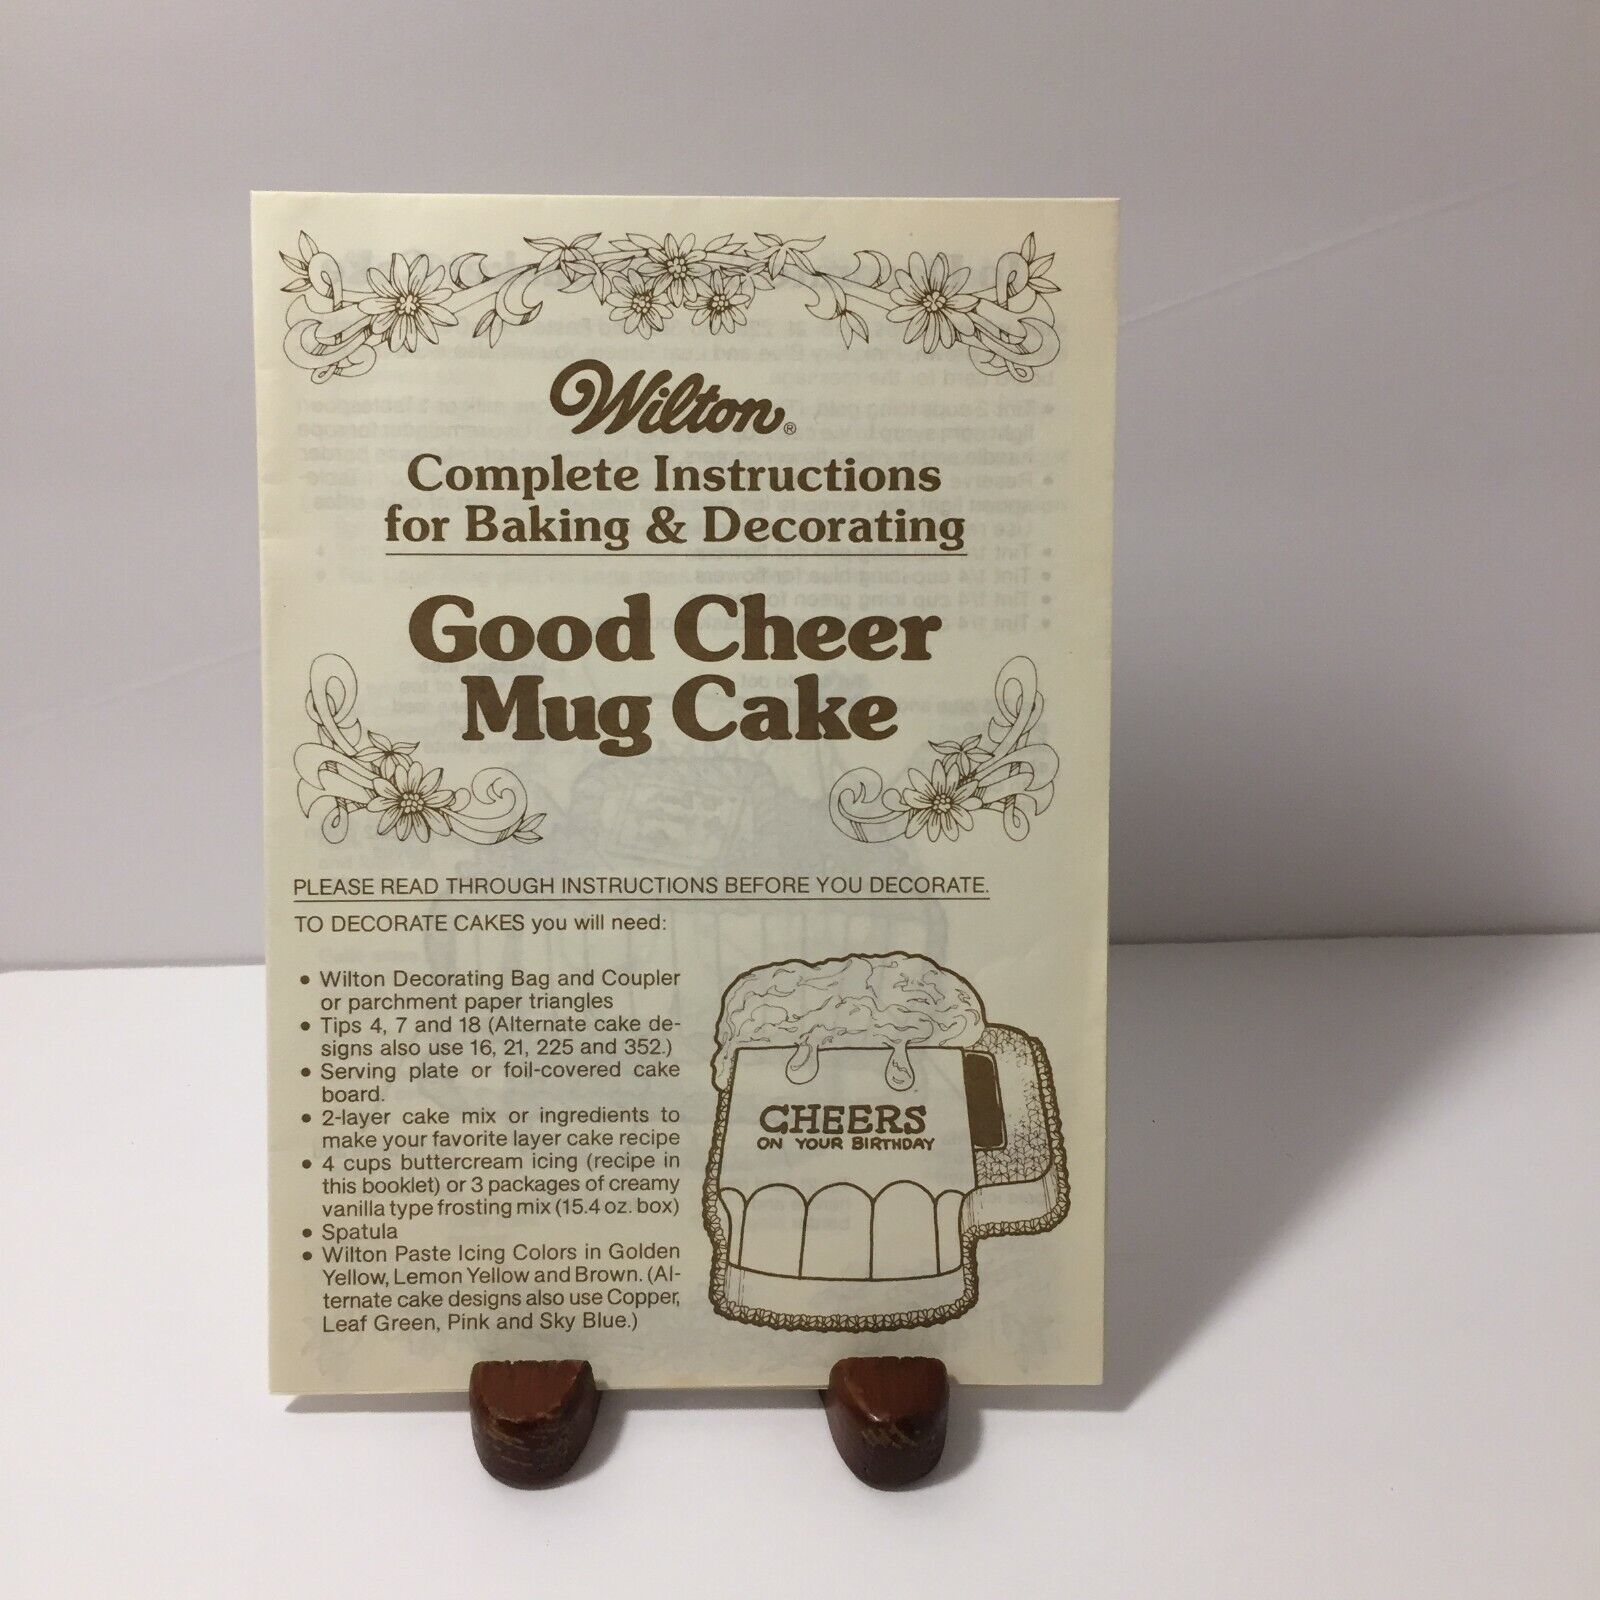 Primary image for Wilton Complete Instructions Baking & Decorating Good Cheer Mug Cake